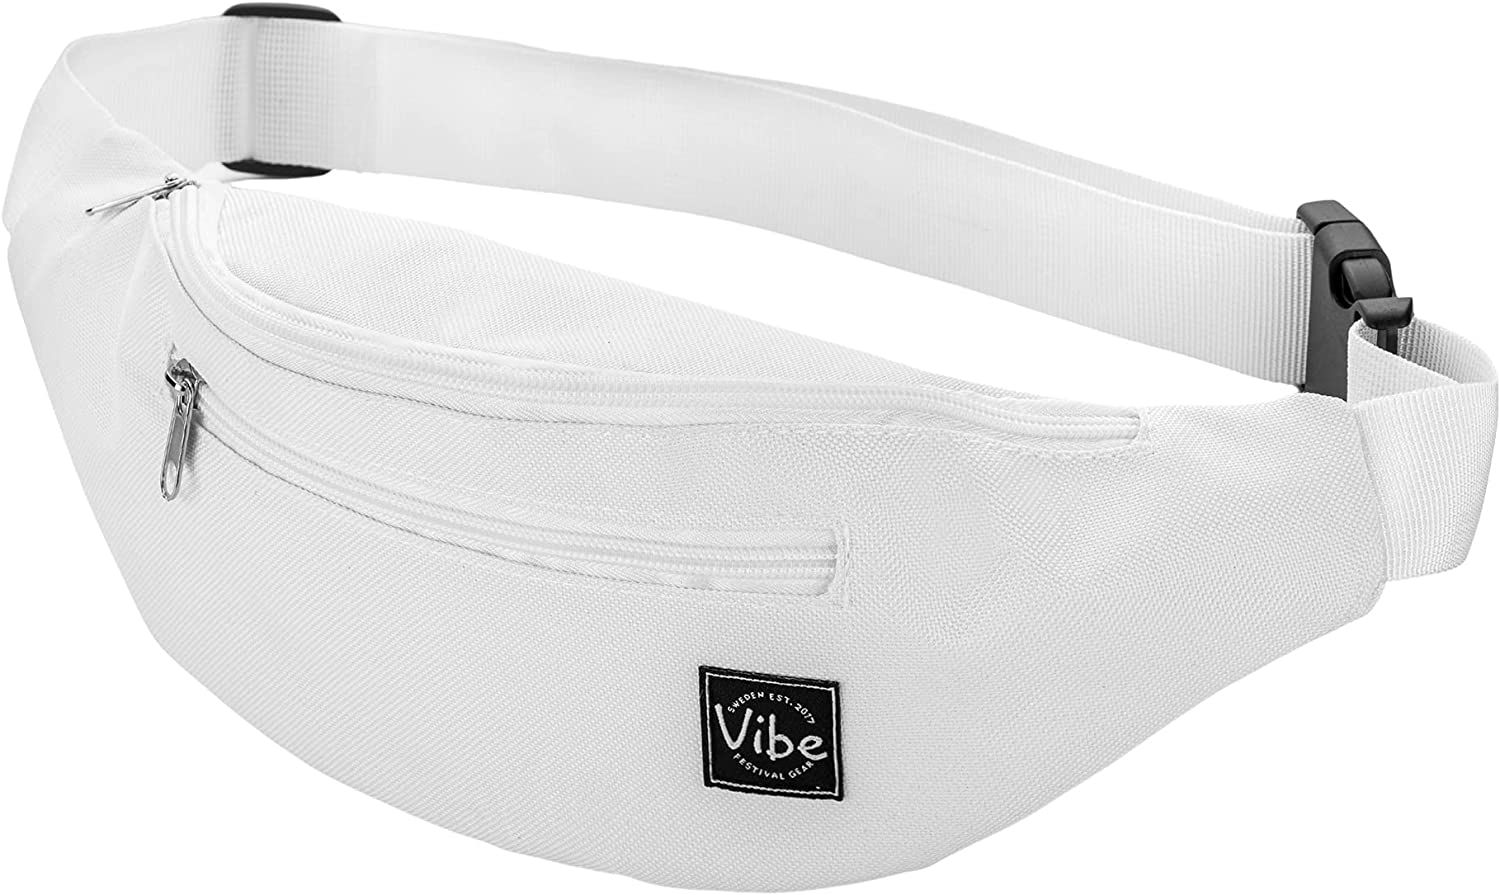 Vibe Festival Gear Fanny Pack for Men Women - Many Prints - Black Holographic Silver Gold Cute Wa... | Amazon (US)